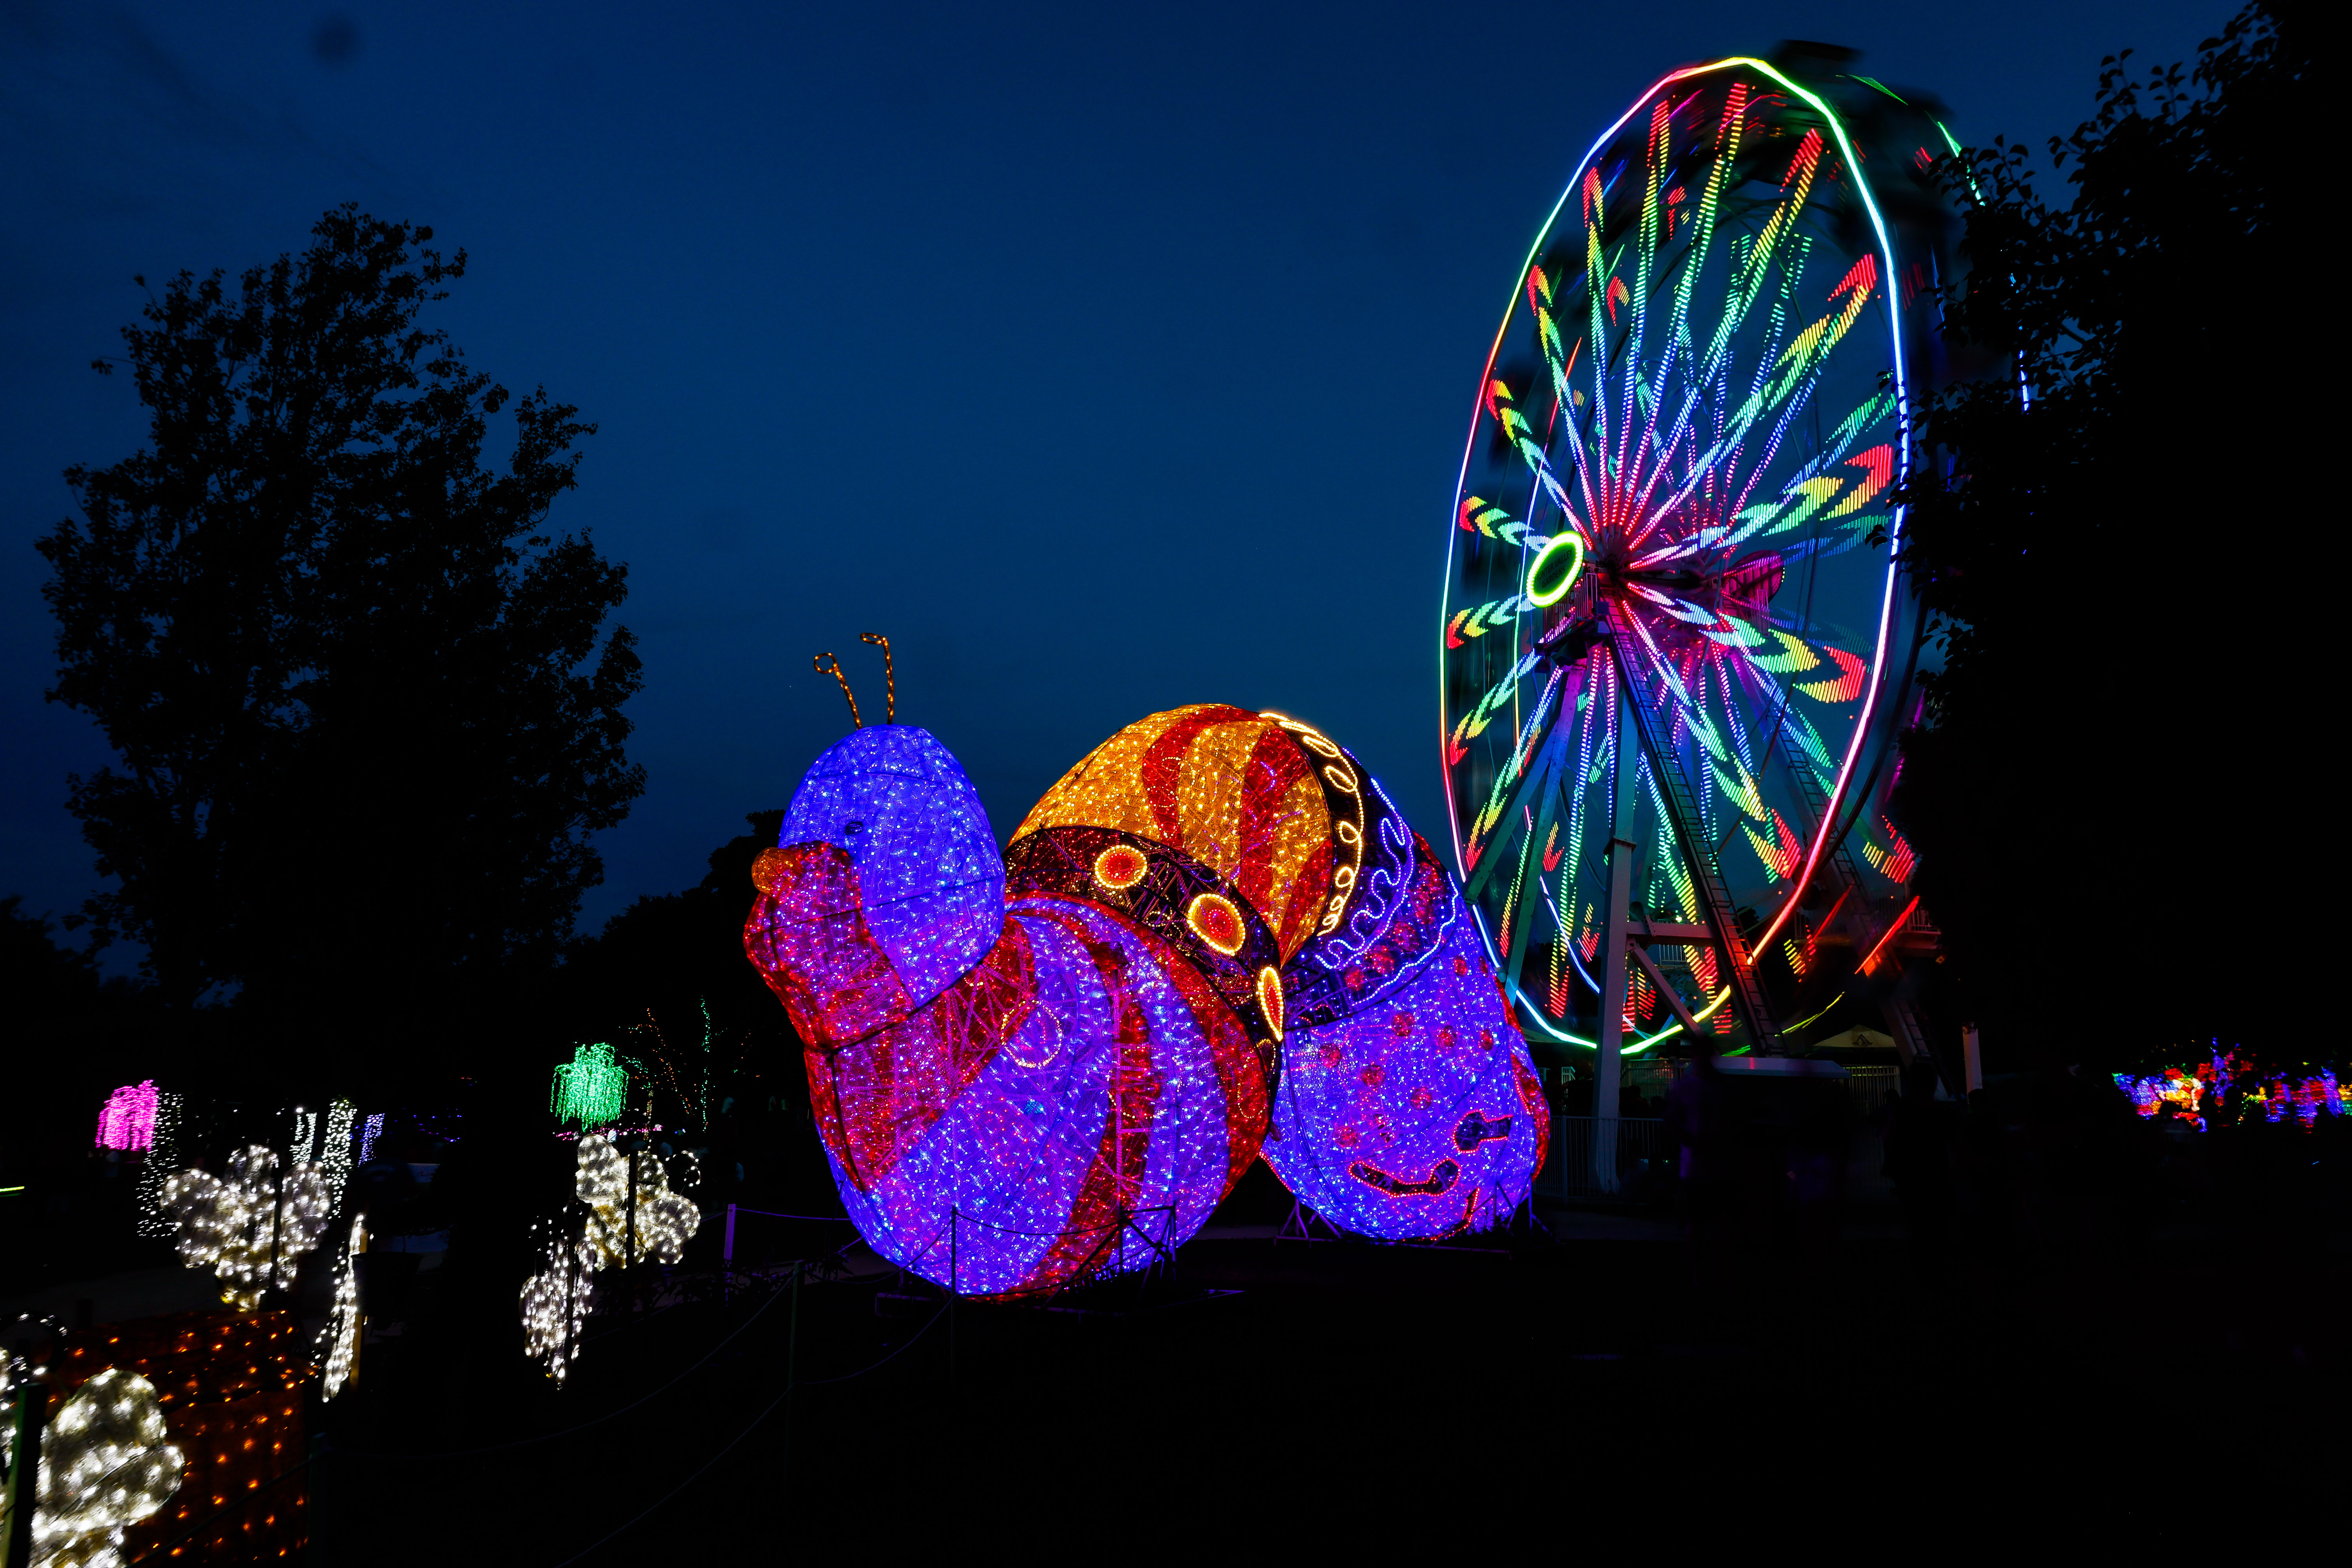 Light display in the fairgrounds